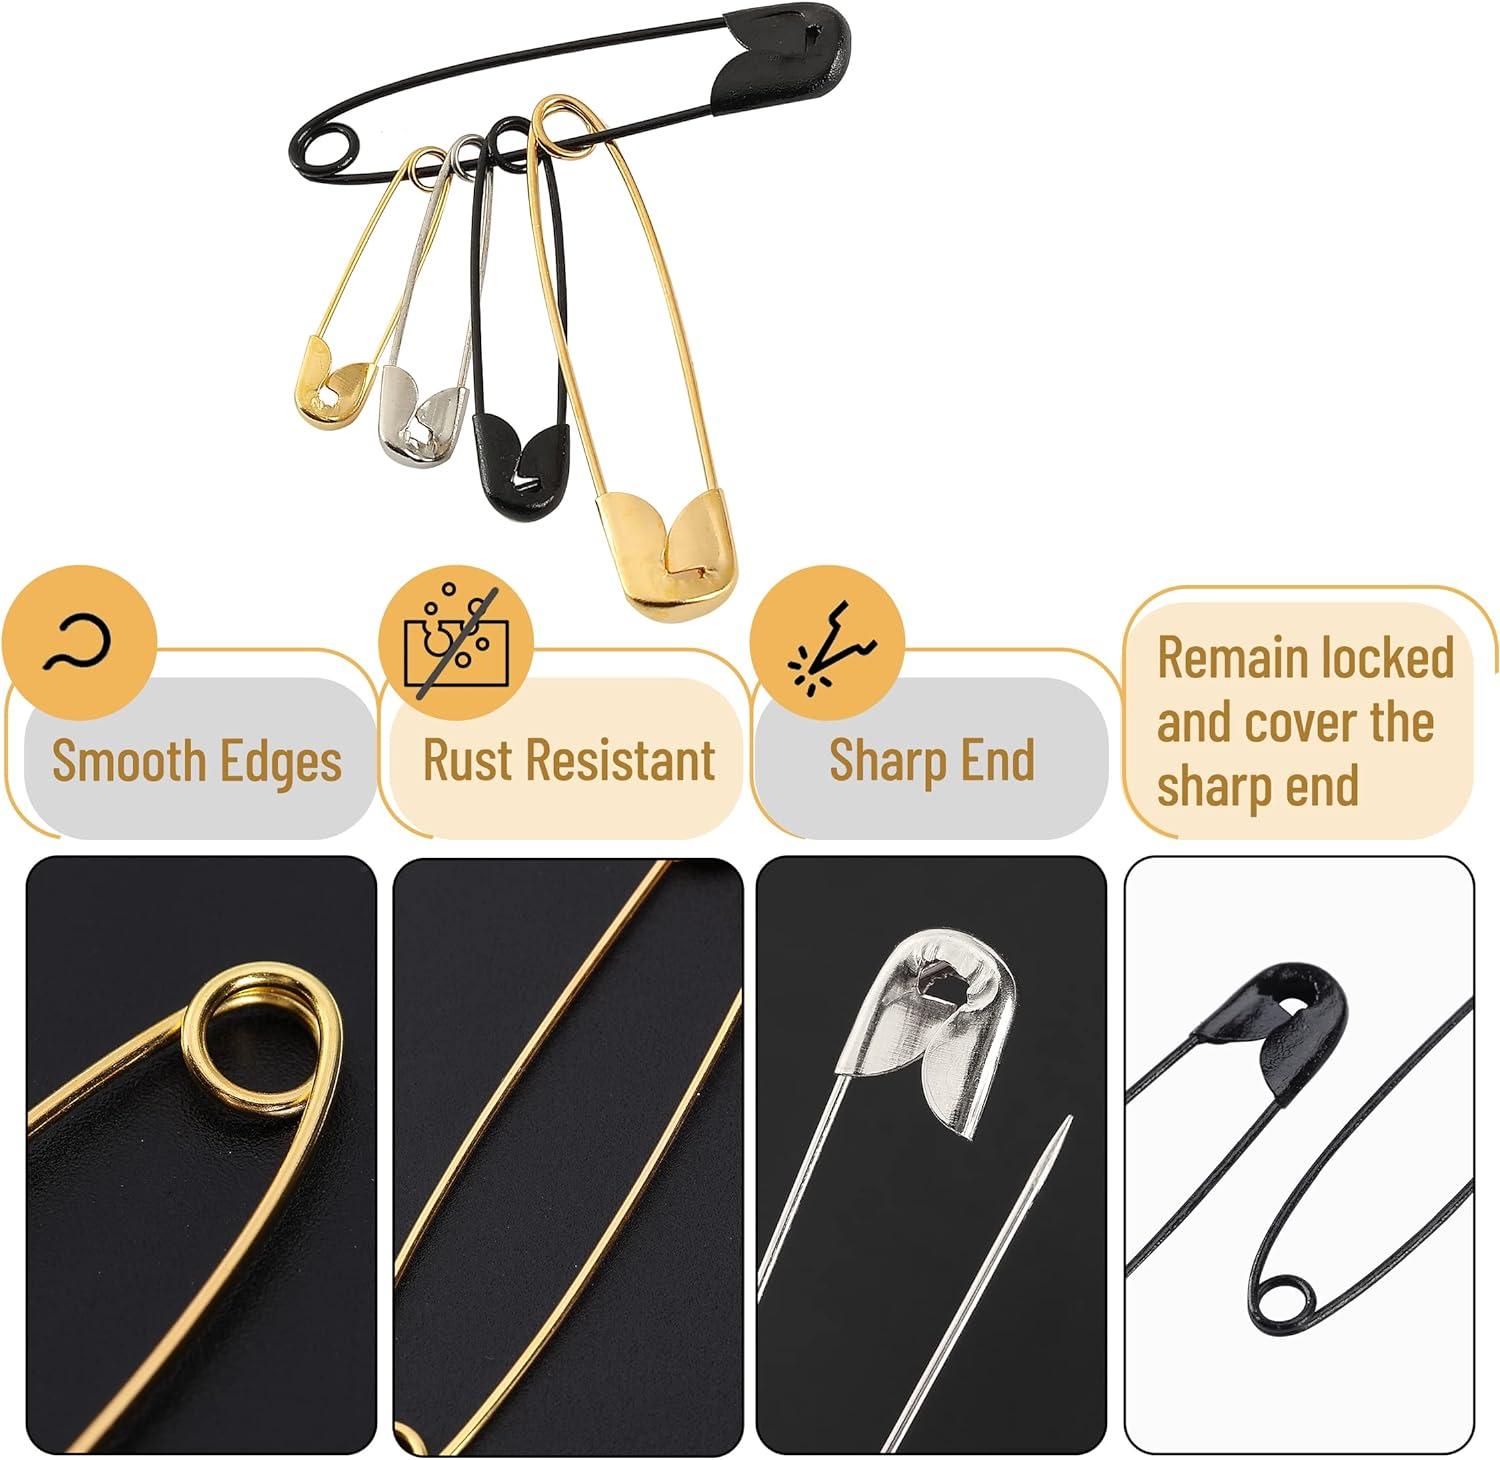 Mr. Pen- Safety Pins, Safety Pins Assorted, Assorted Color Safety Pins,  Safety Pin, Small Safety Pins, Safety Pins Bulk, Large Safety Pins, Safety